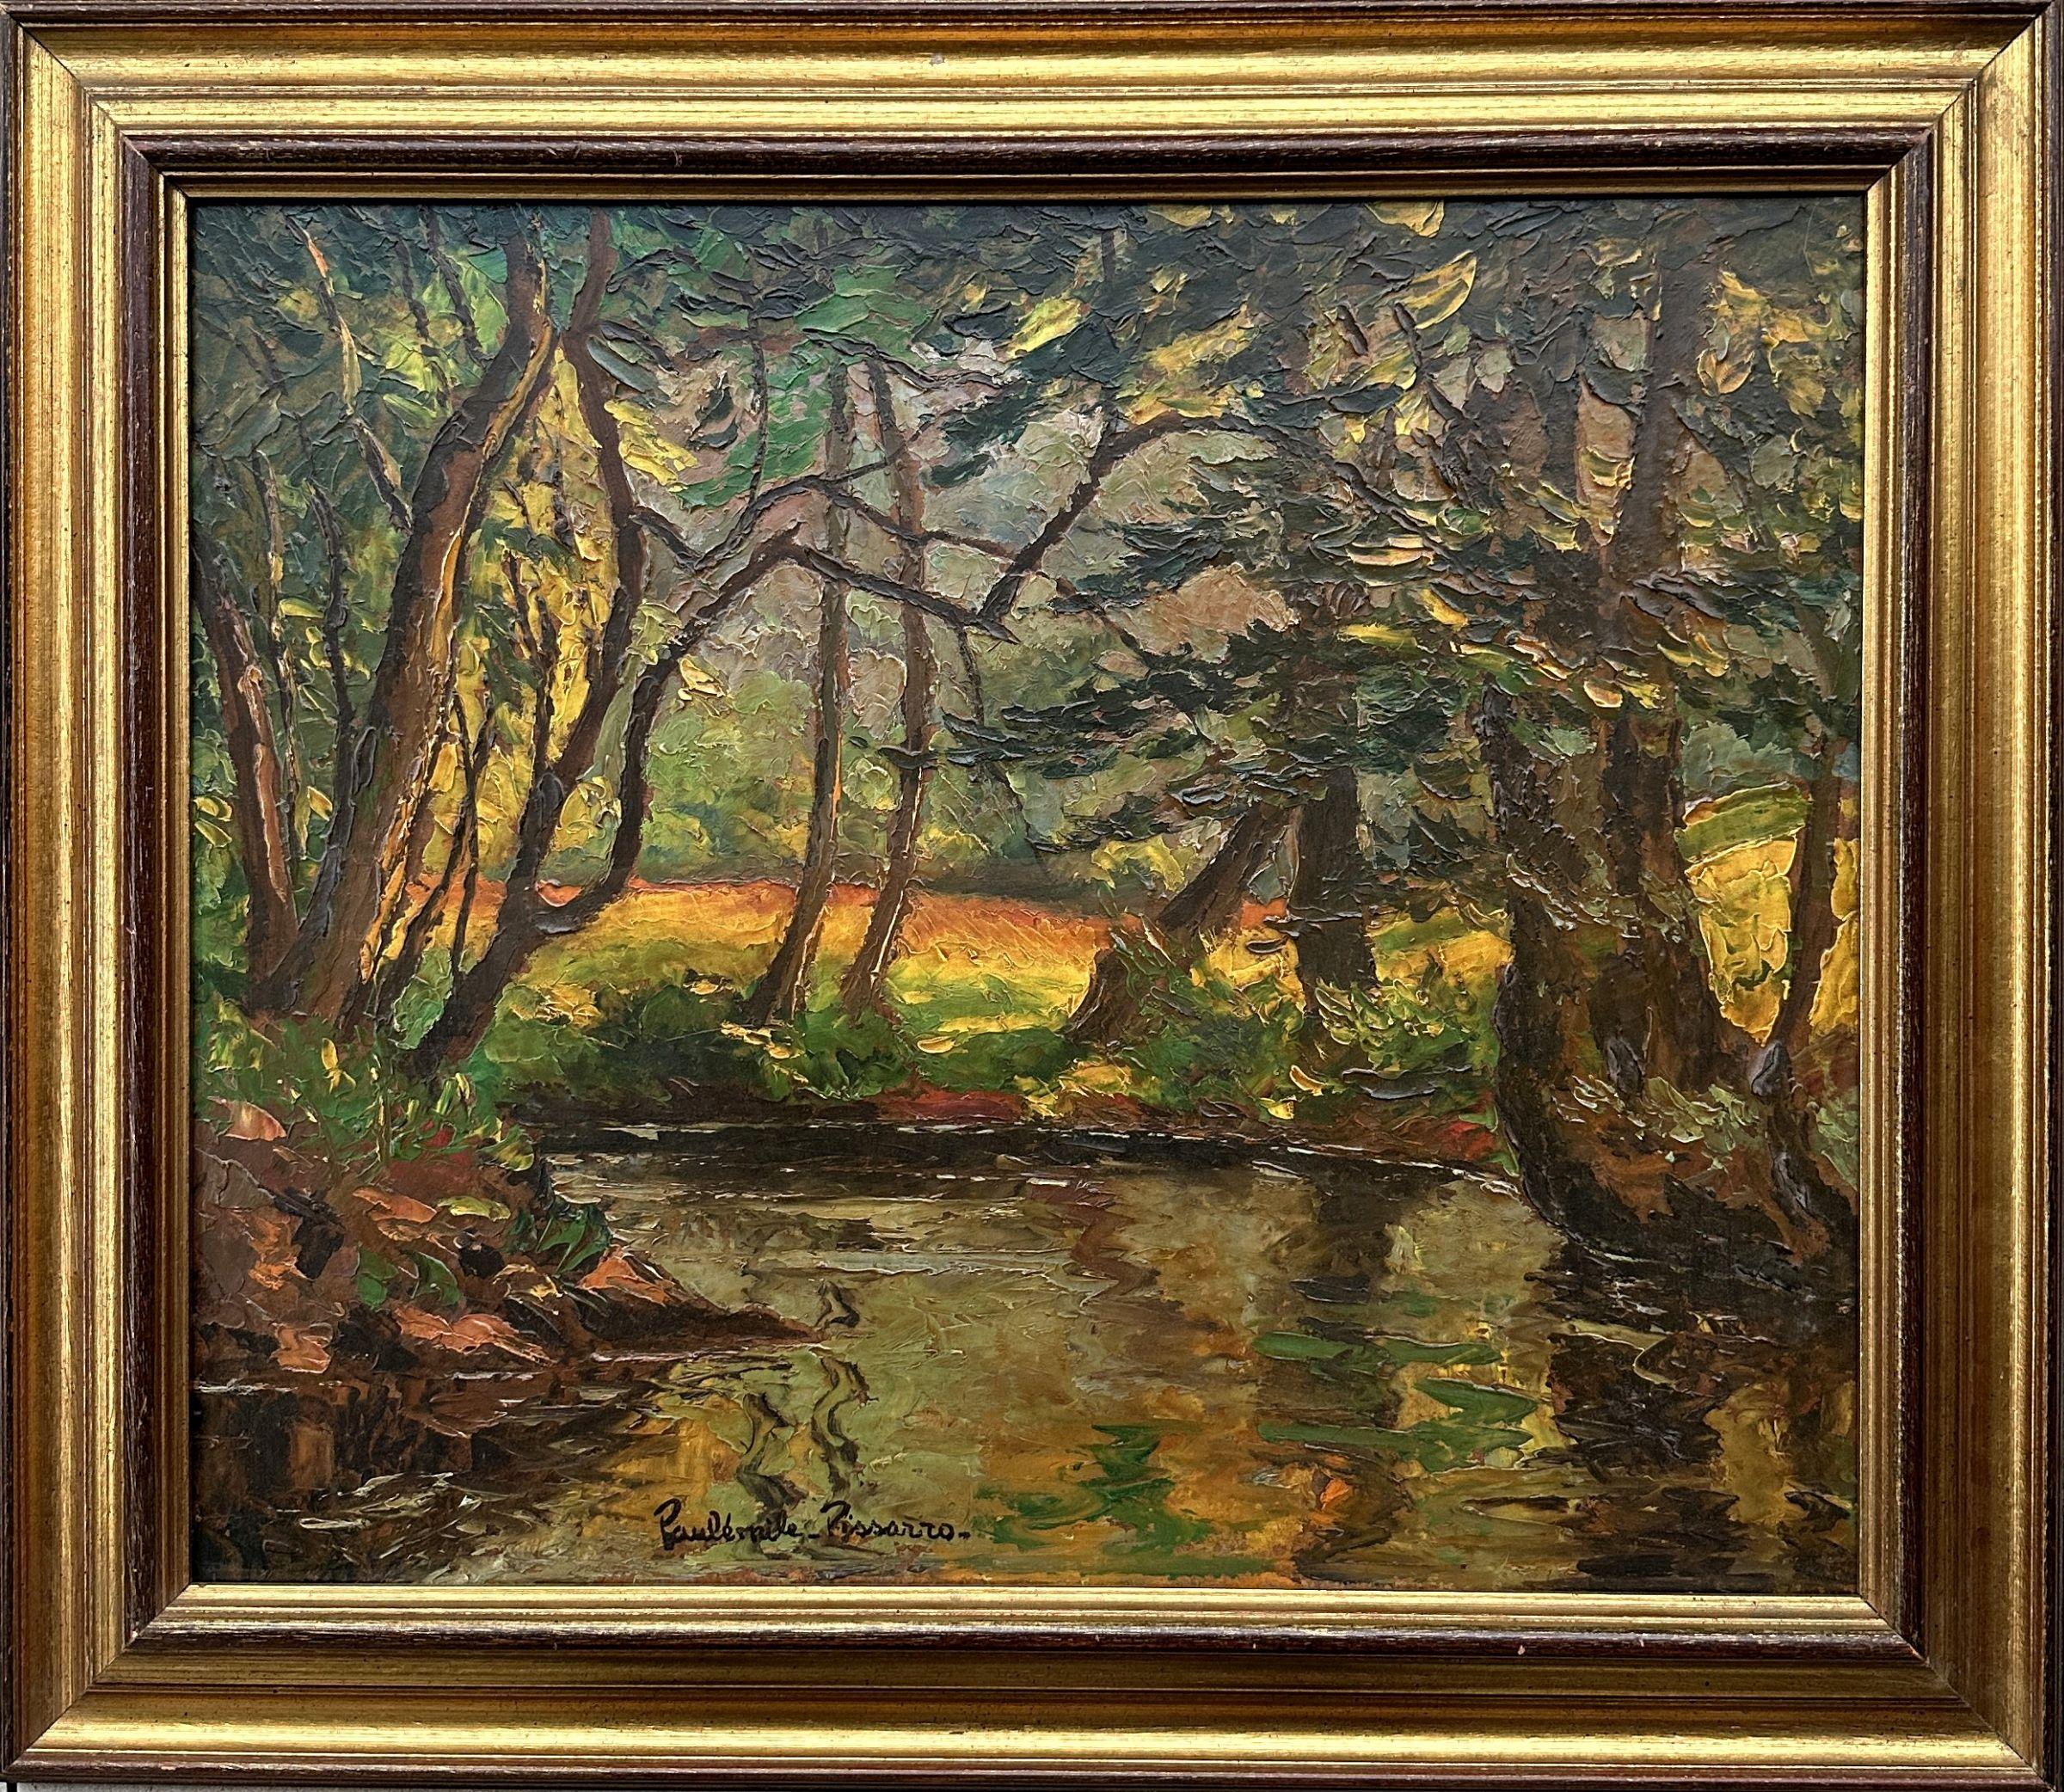 Calvados : River in the forest  - Original oil painting, Handsigned